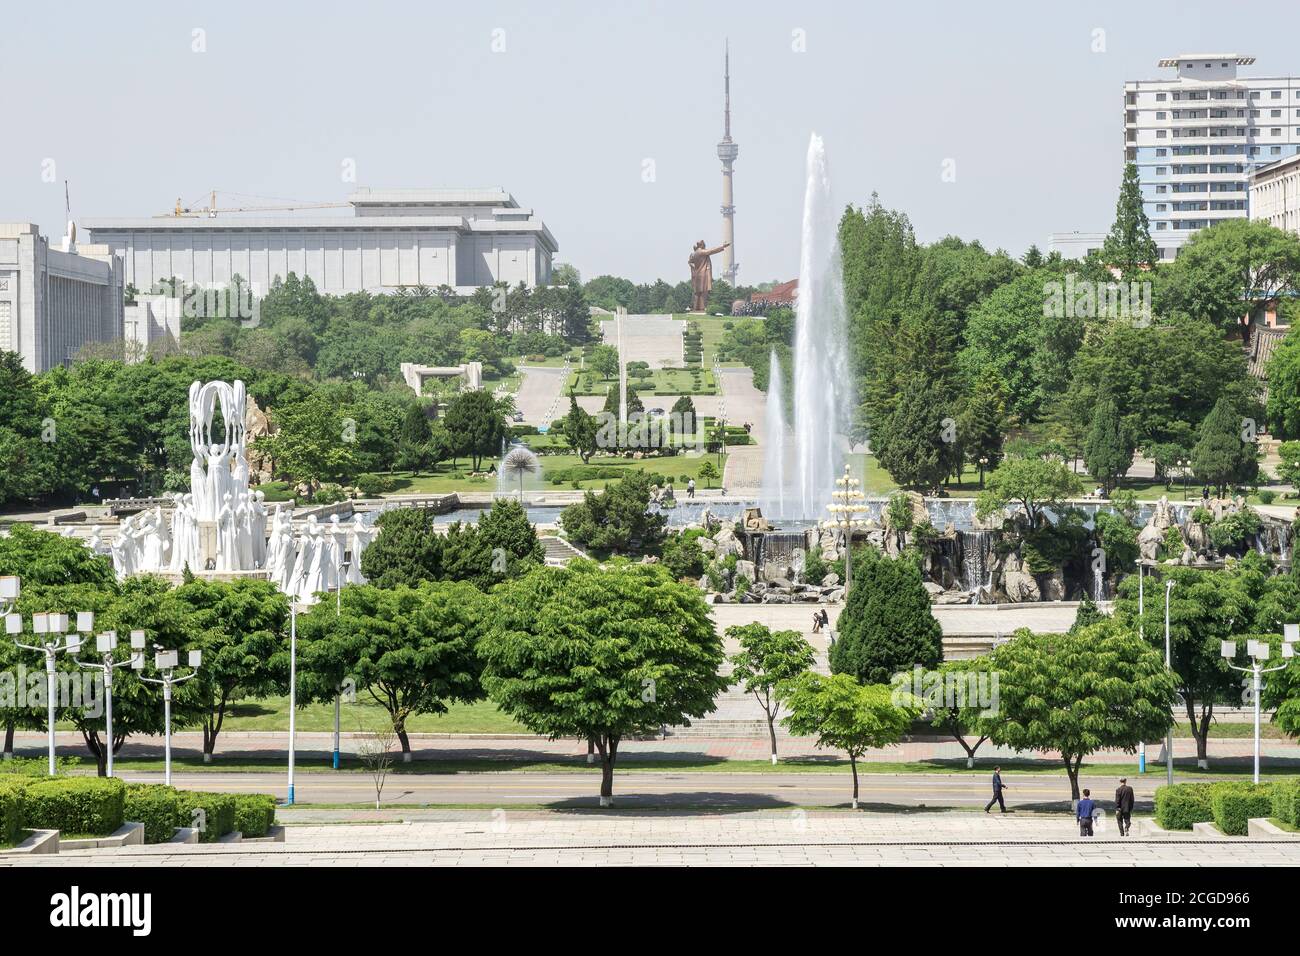 The Statues from the Grand People’s Study House, North Korea Stock Photo